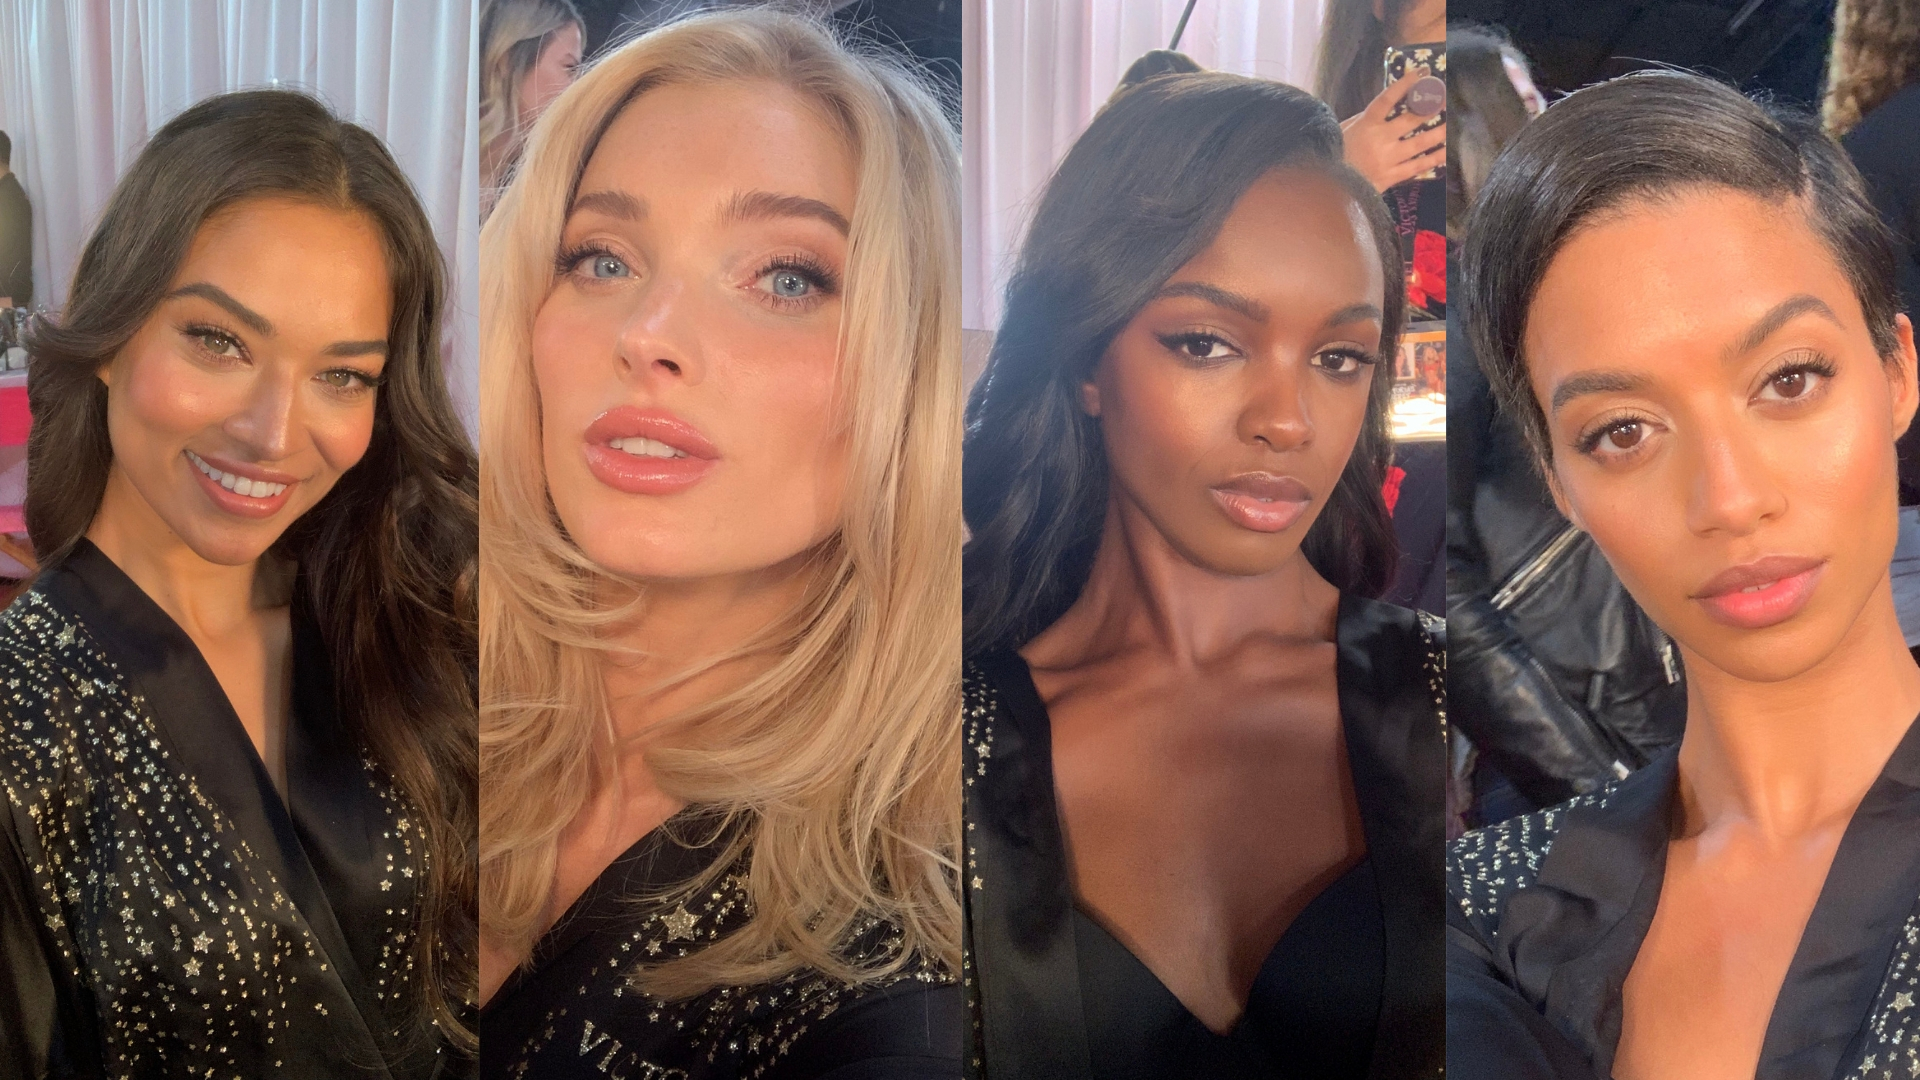 4 Victoria's Secret Angels Reveal How To Take The Perfect Selfie